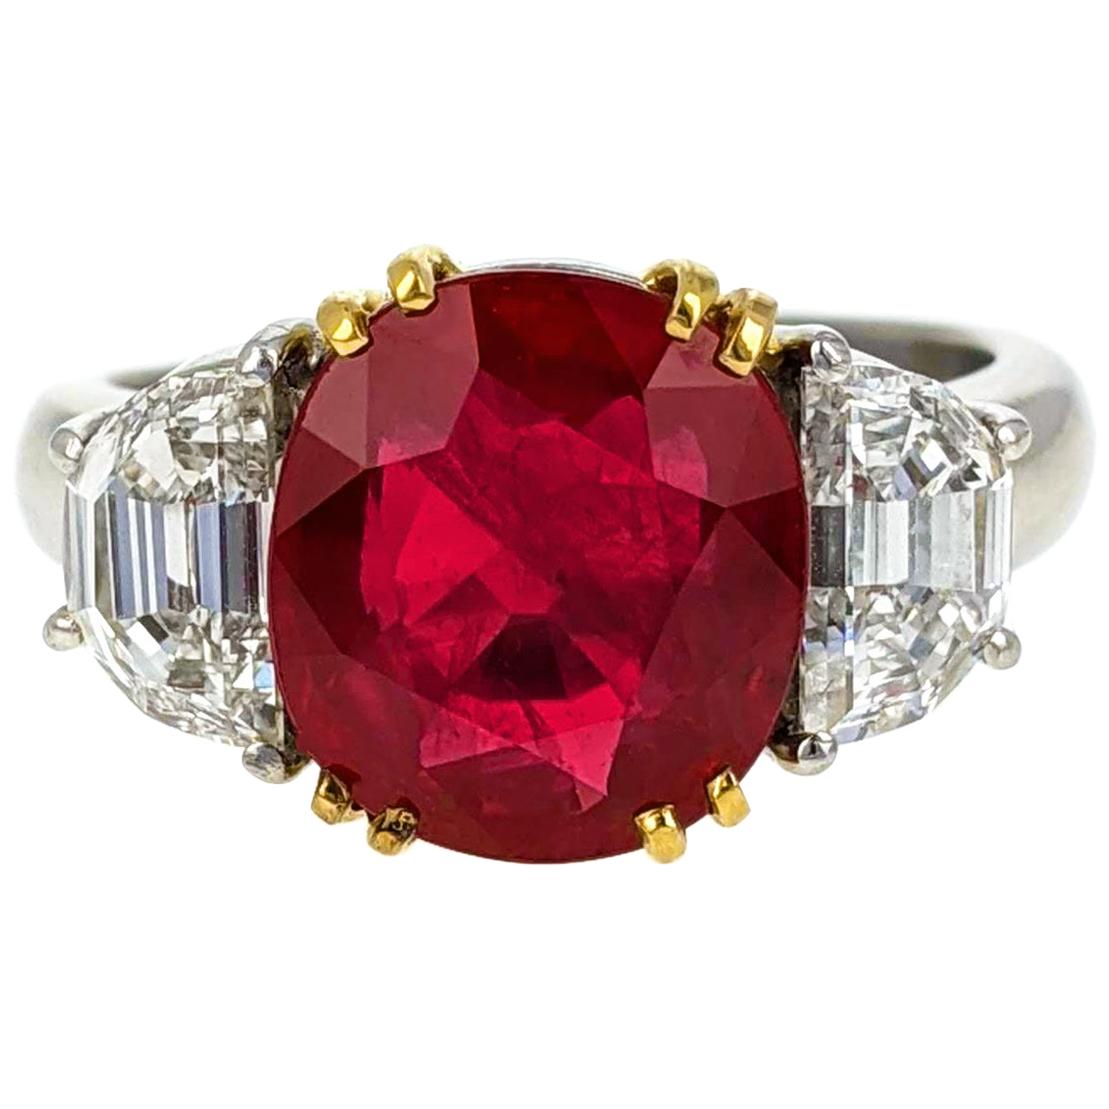 4.07 Carat Burma Ruby Diamond Platinum and Gold Ring For Sale